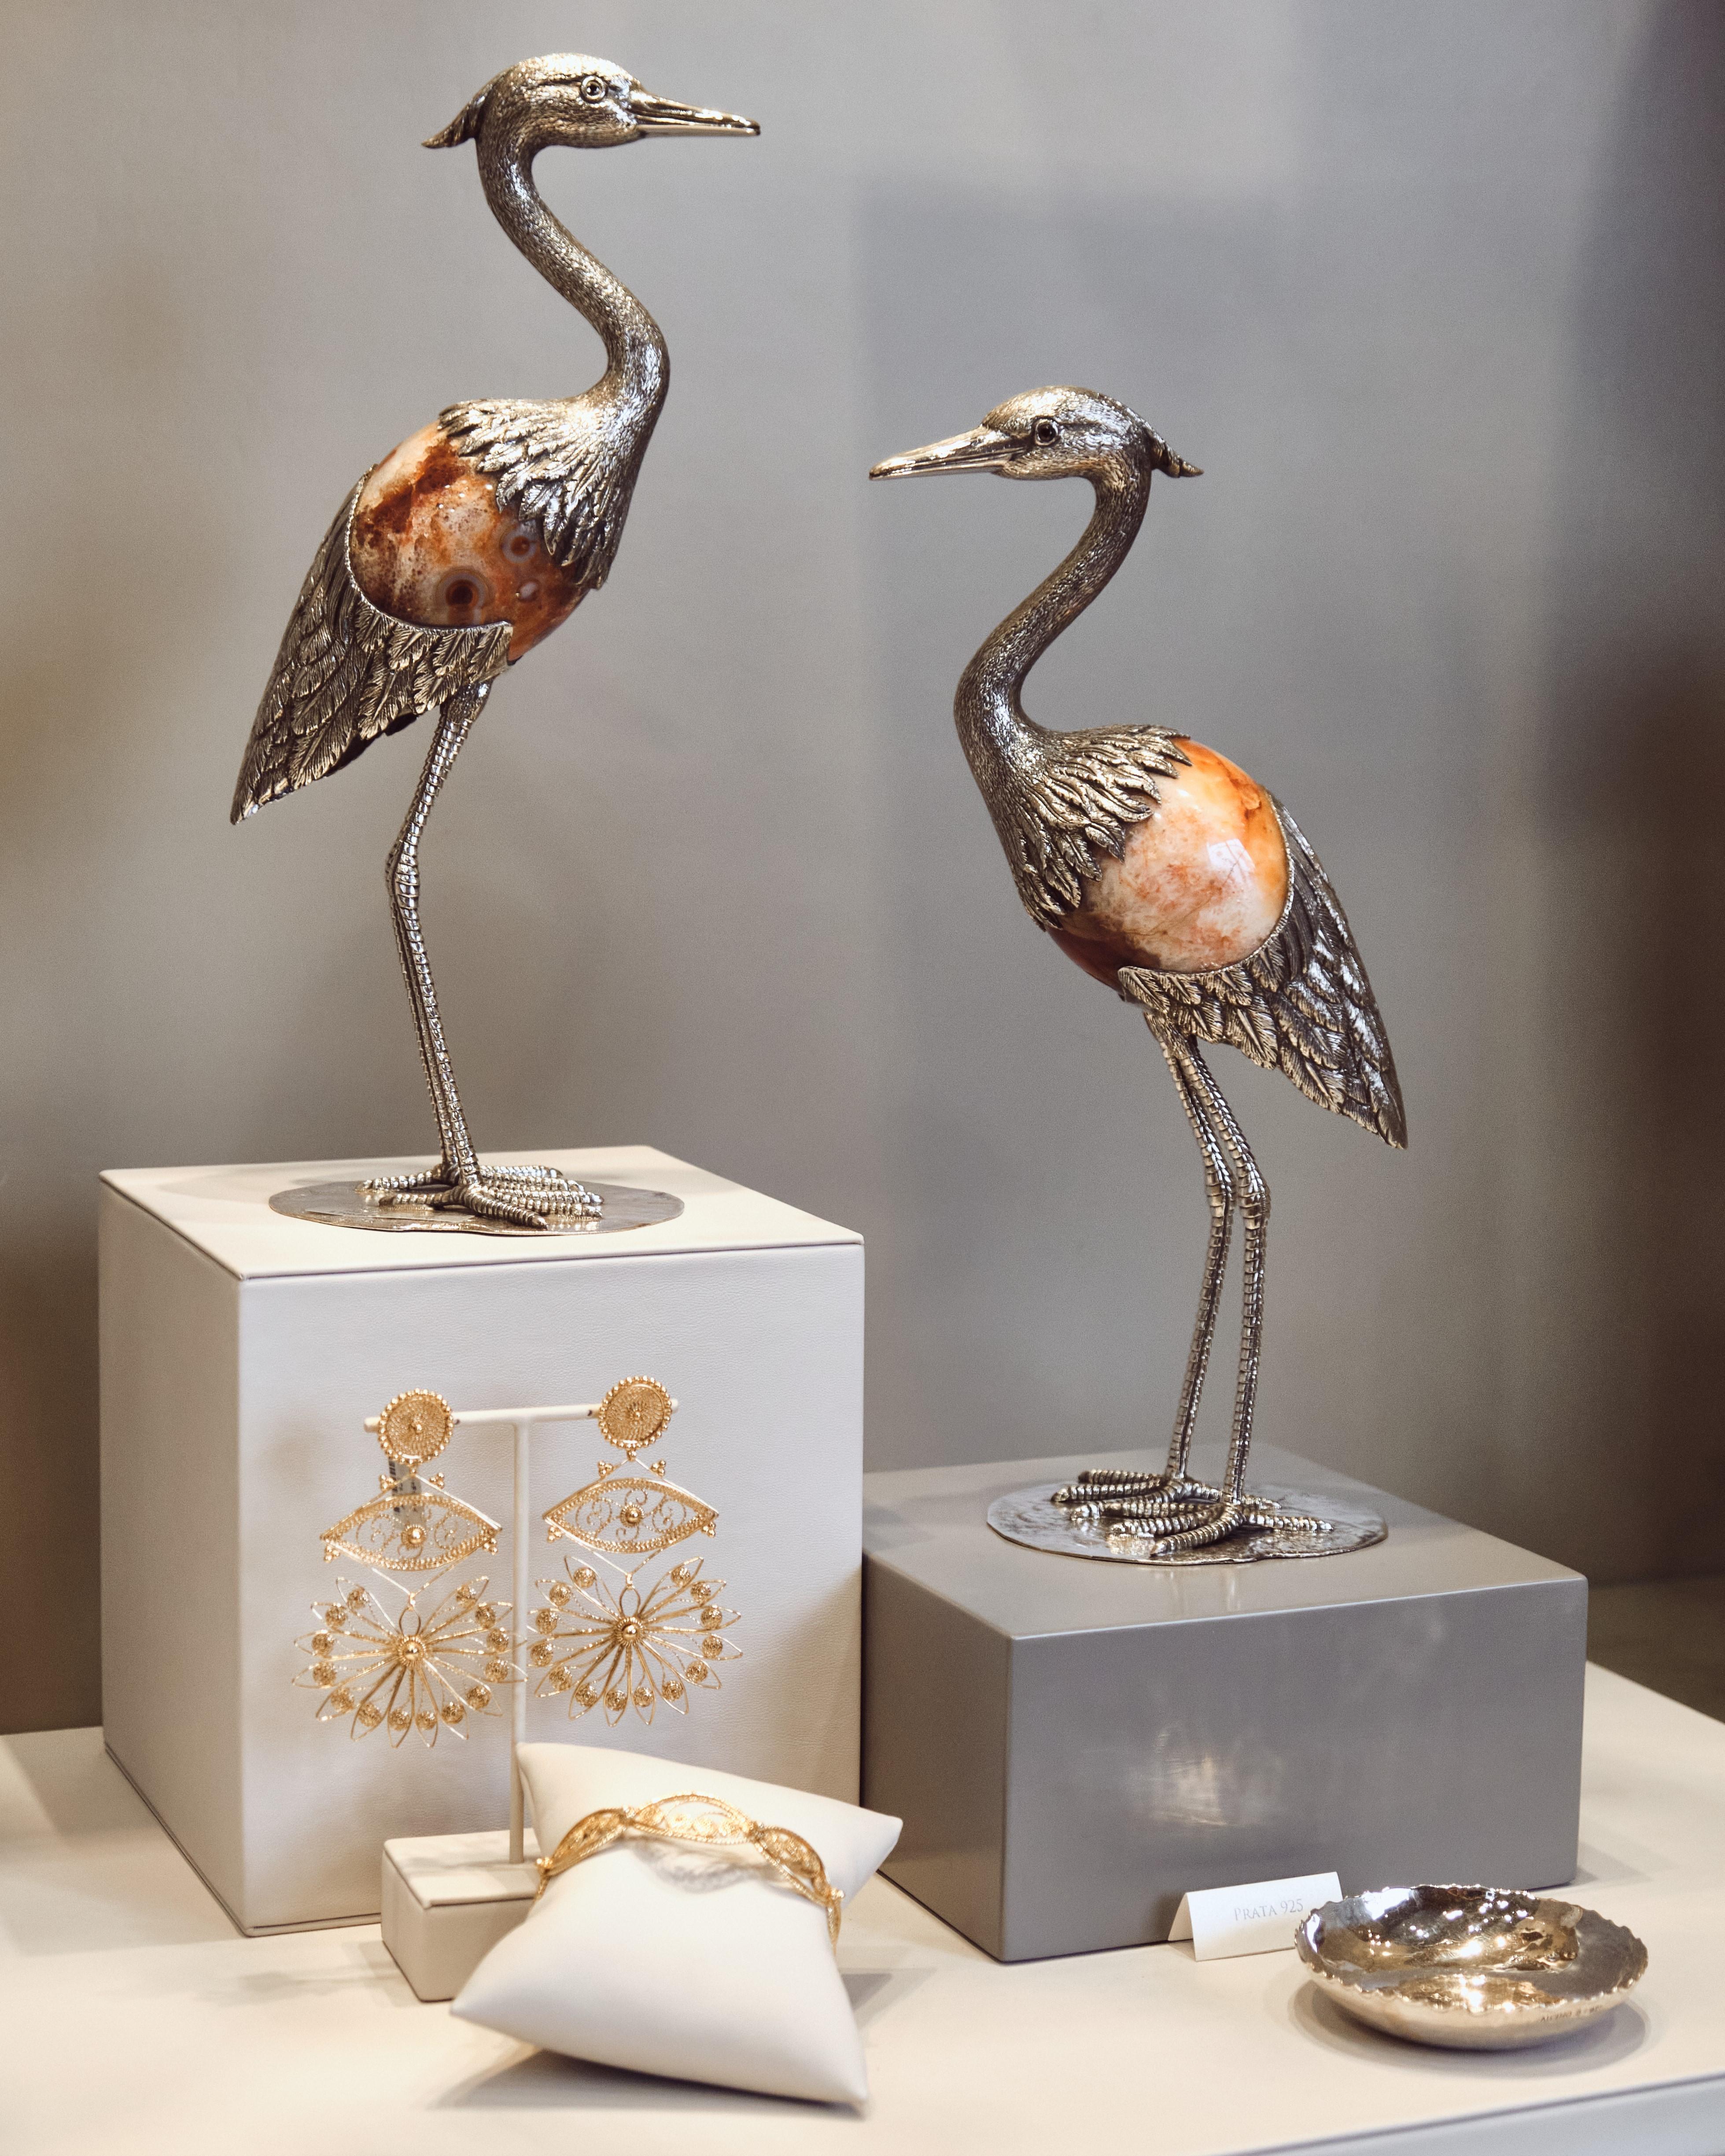 Heron by Alcino Silversmith 1902 is a handcrafted piece in 925 sterling silver with orange agate application.

The piece is totally handcrafted, hammered and chiseled by excellent craftsmen, giving this piece a much higher future valorization.